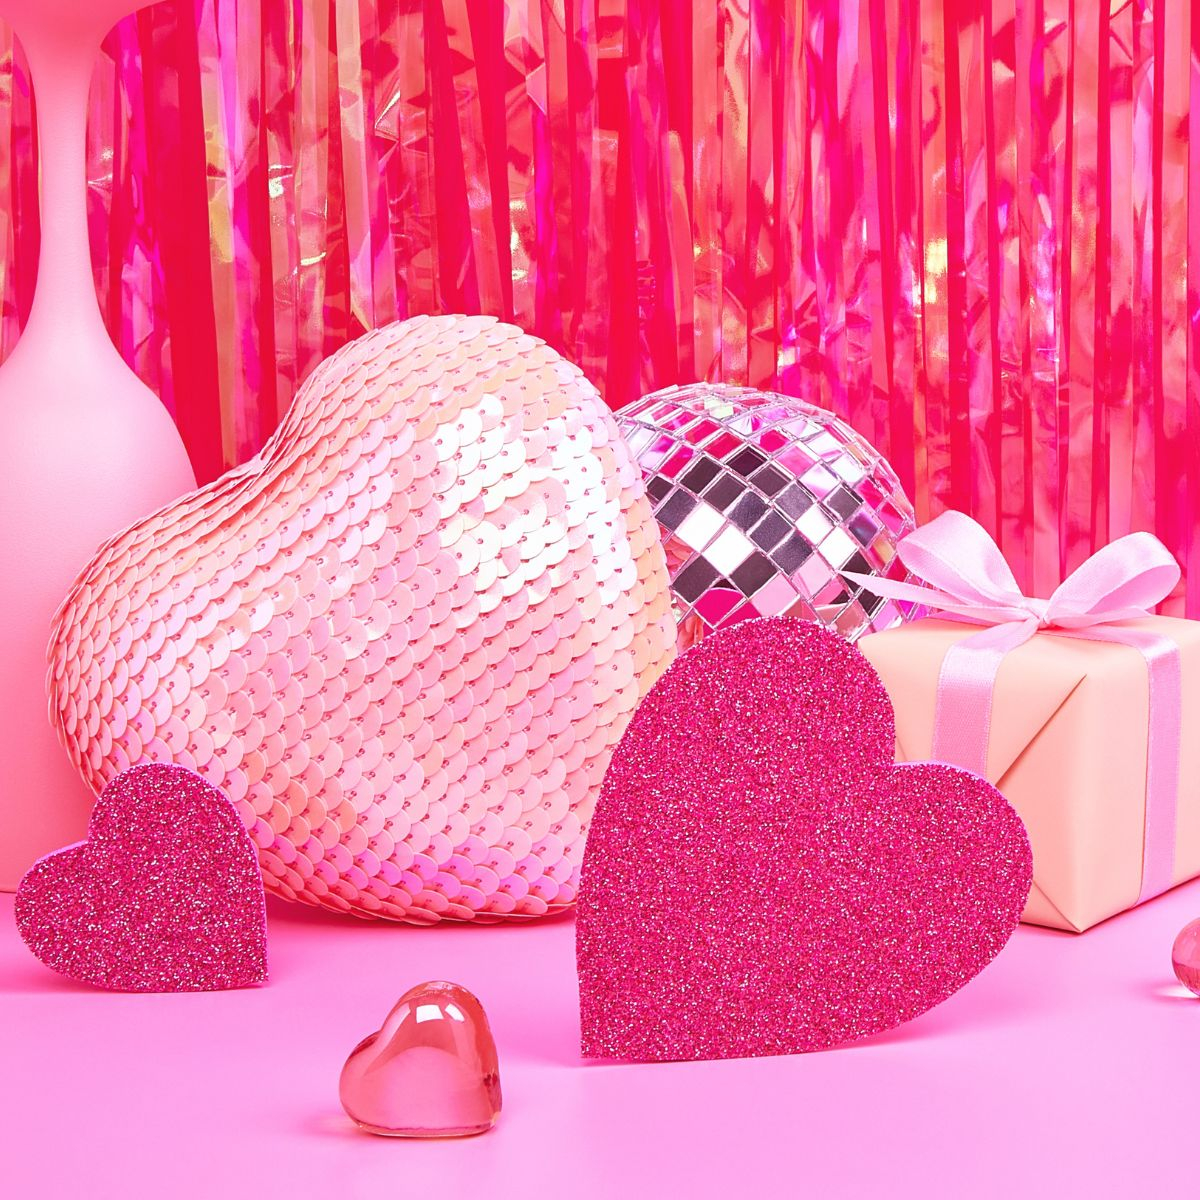 The best Galentine's Day gifts 2022, according to the IndyBest